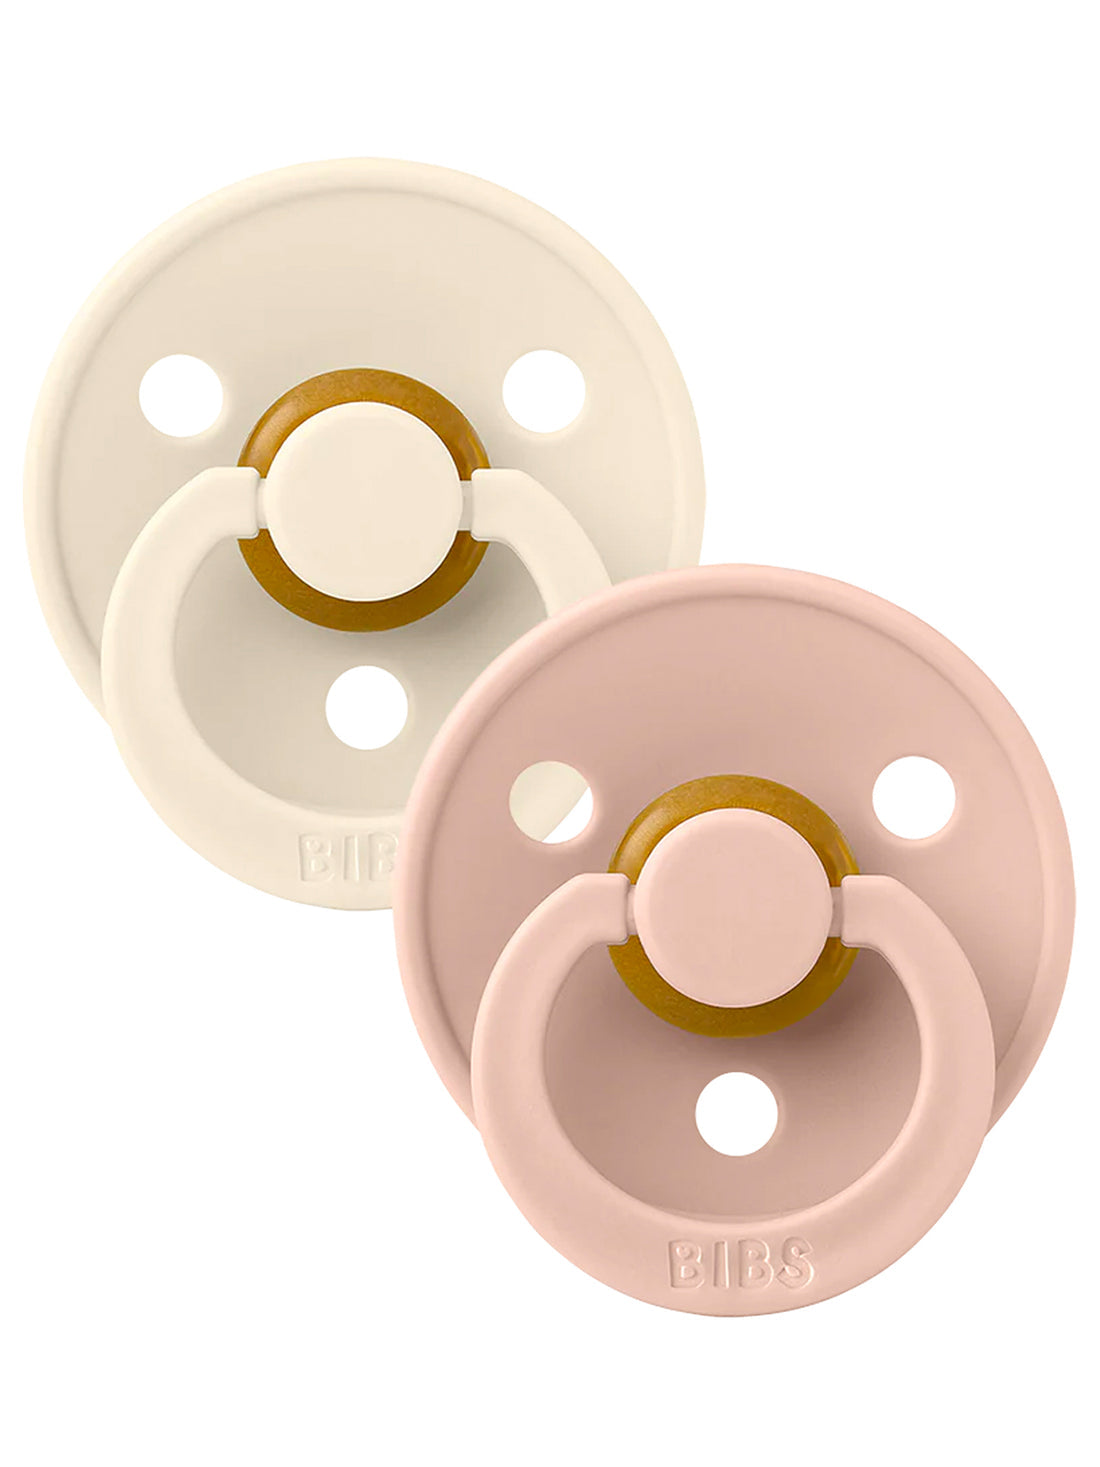 BIBS Pacifiers Classic Round 2 Pack: Ivory/Blush